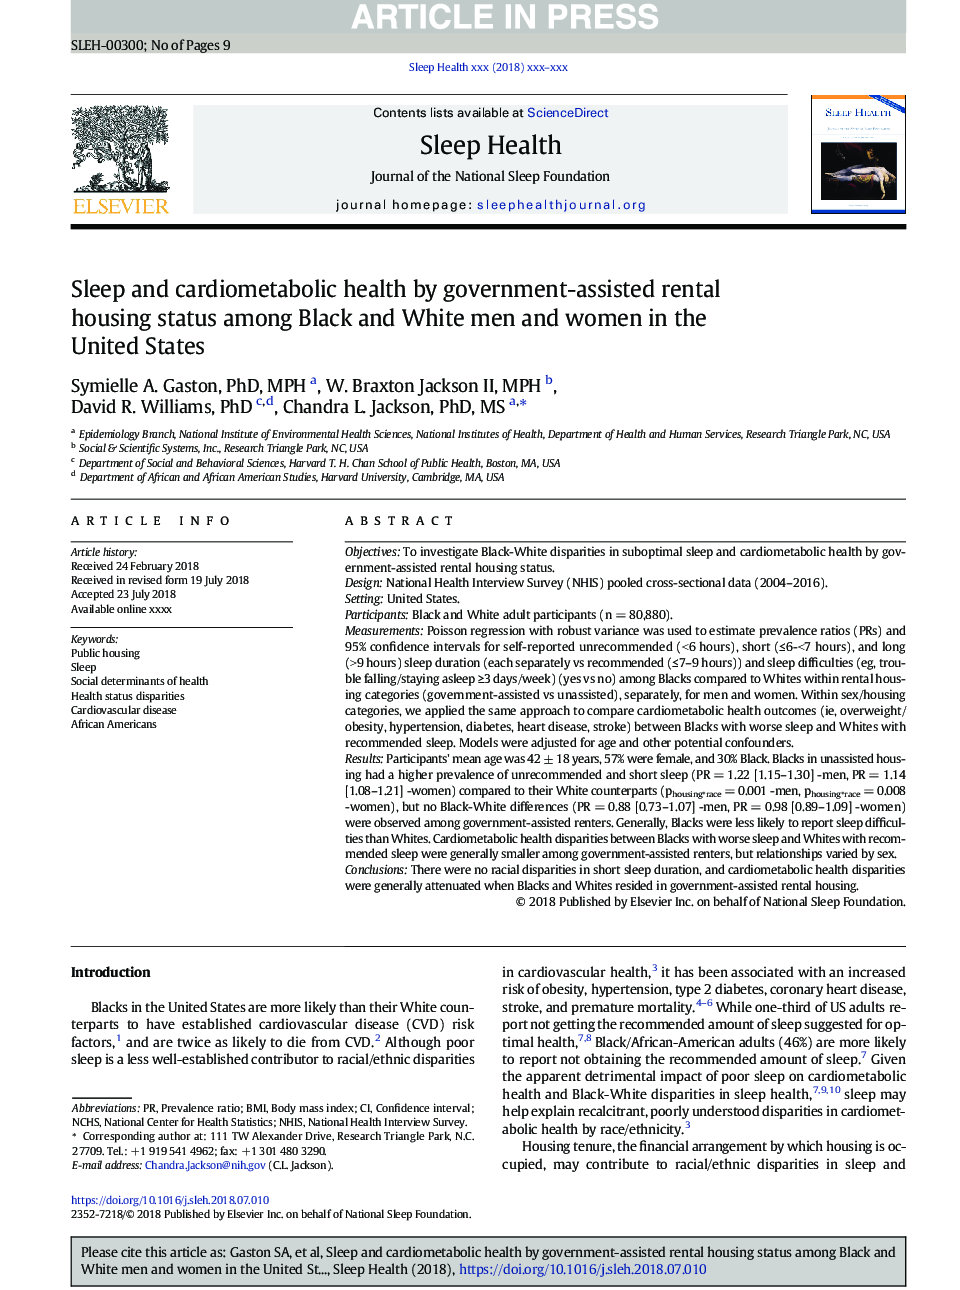 Sleep and cardiometabolic health by government-assisted rental housing status among Black and White men and women in the United States